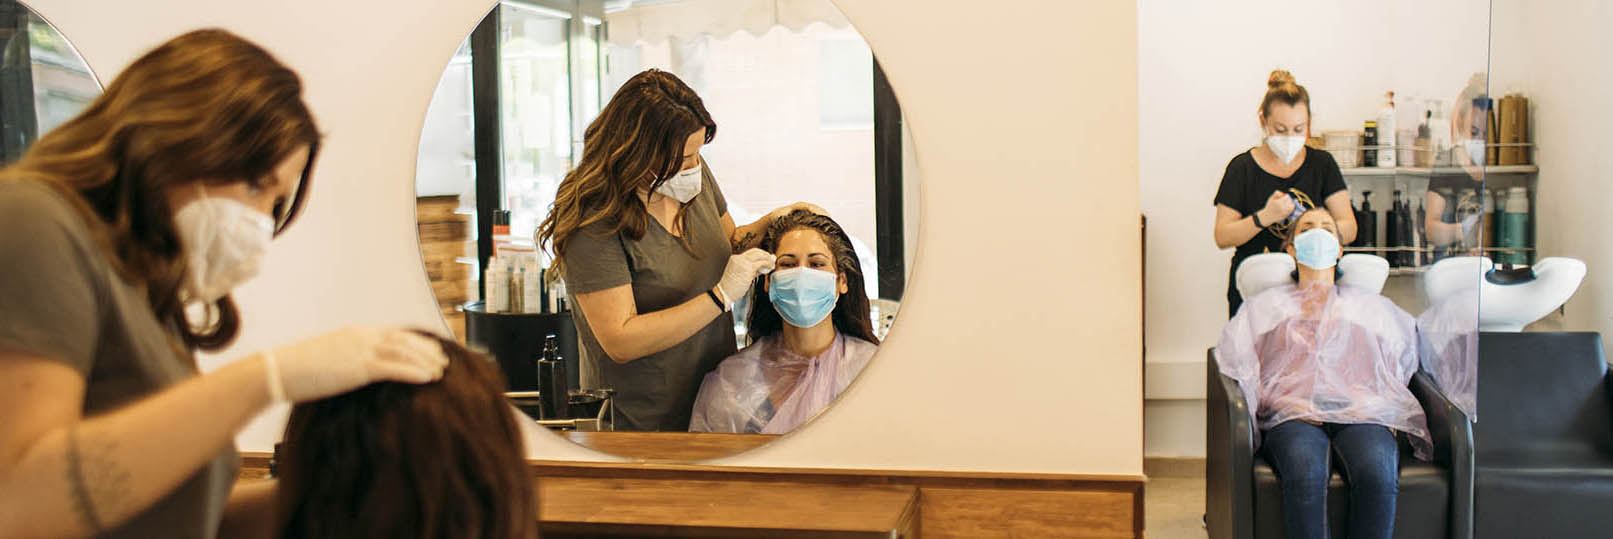 woman in a beauty salon servicing clients, all wearing face masks